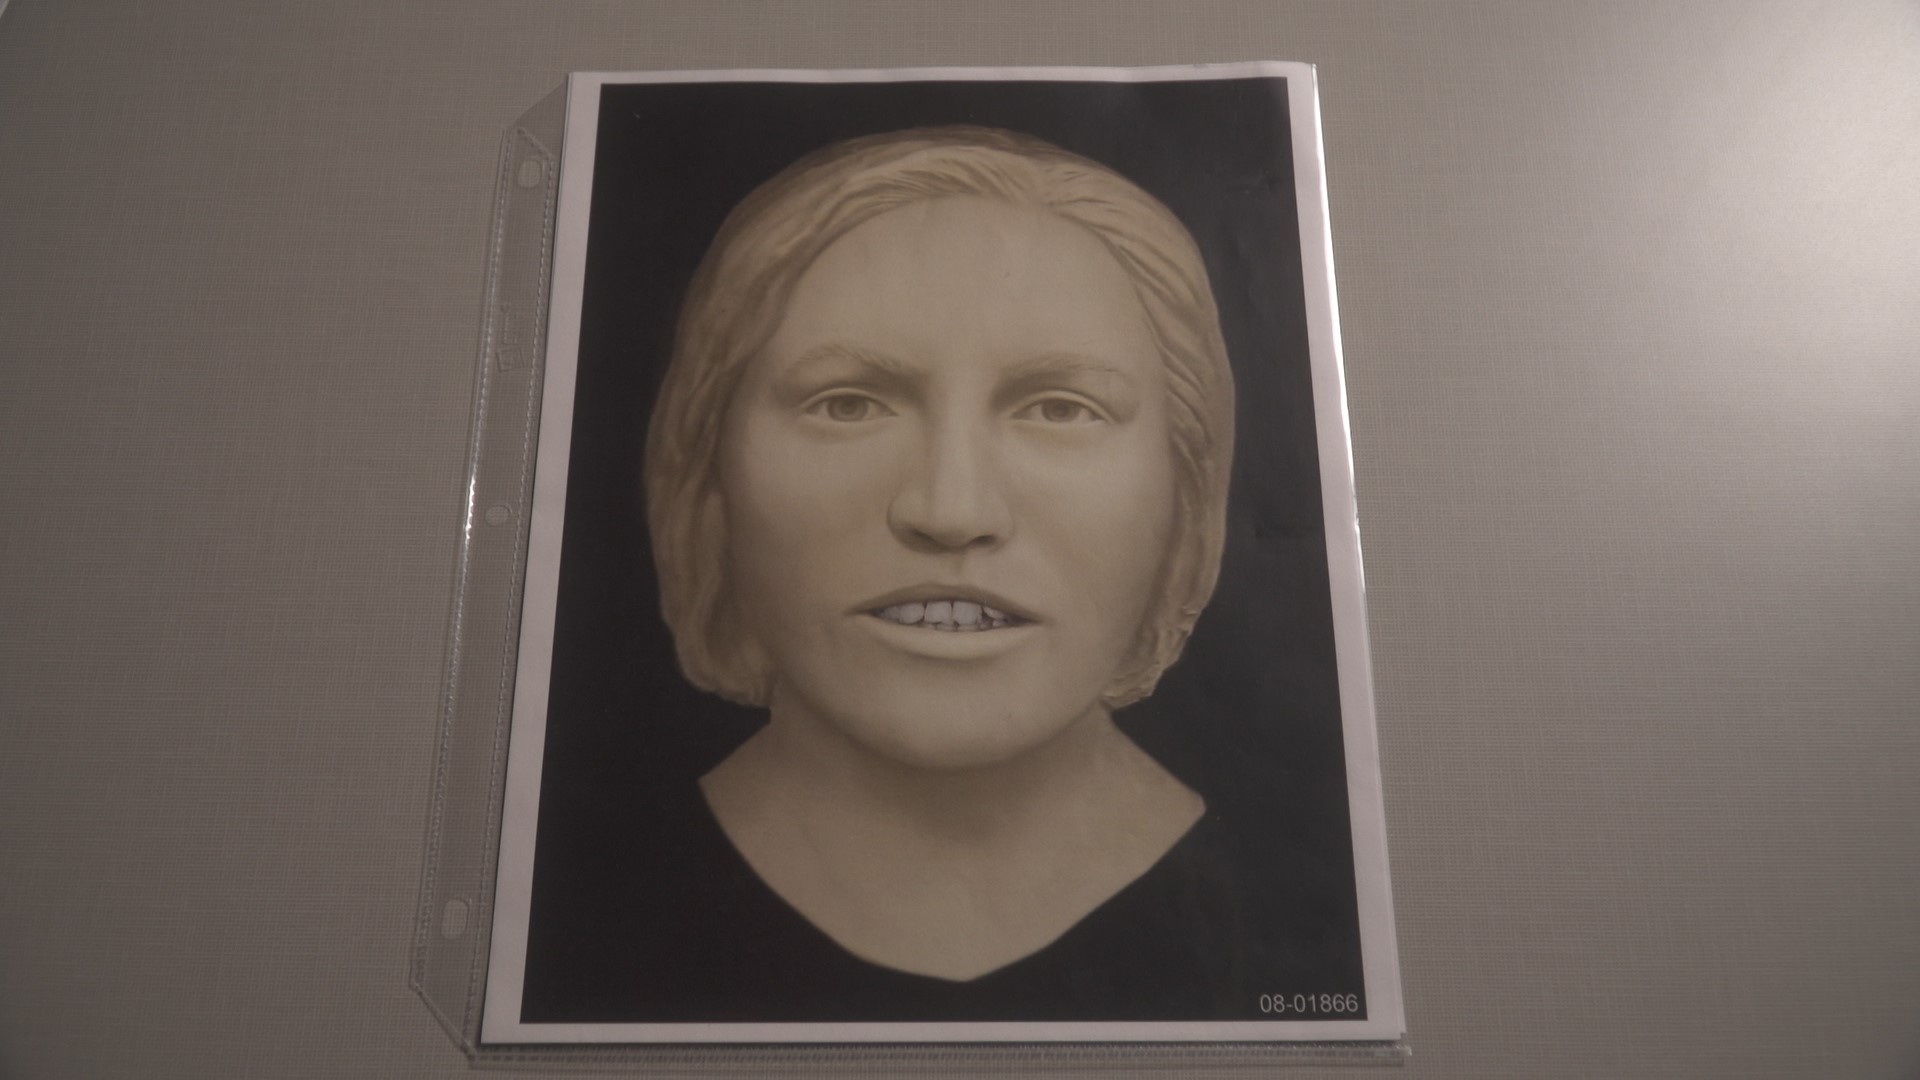 The skeletal remains of a woman were found by a fisherman in 2008 in the Delta. 12 years later, she has not been identified and her killer is unknown.